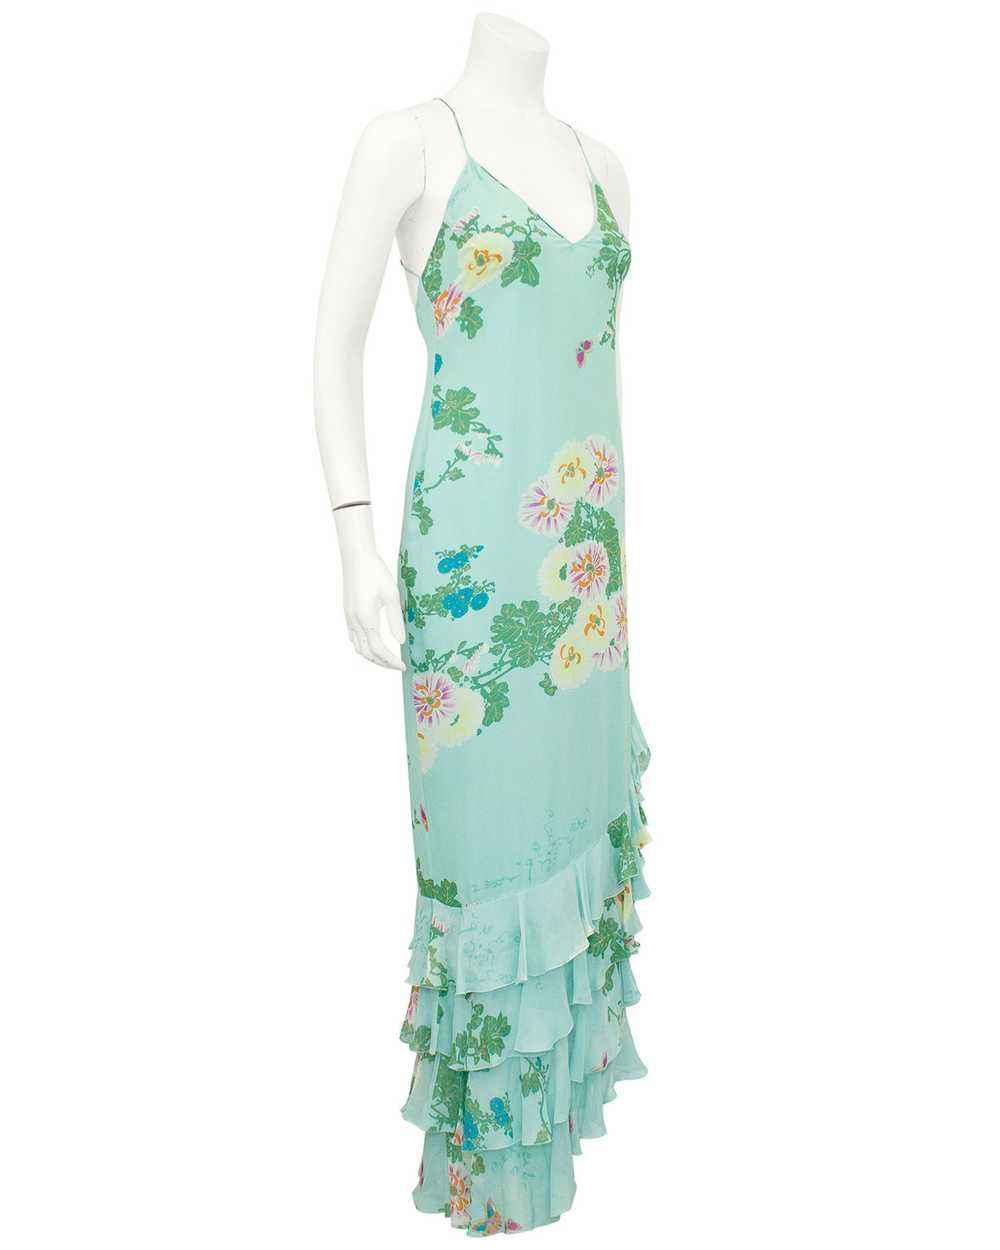 Ungaro Green Floral Gown - image 1